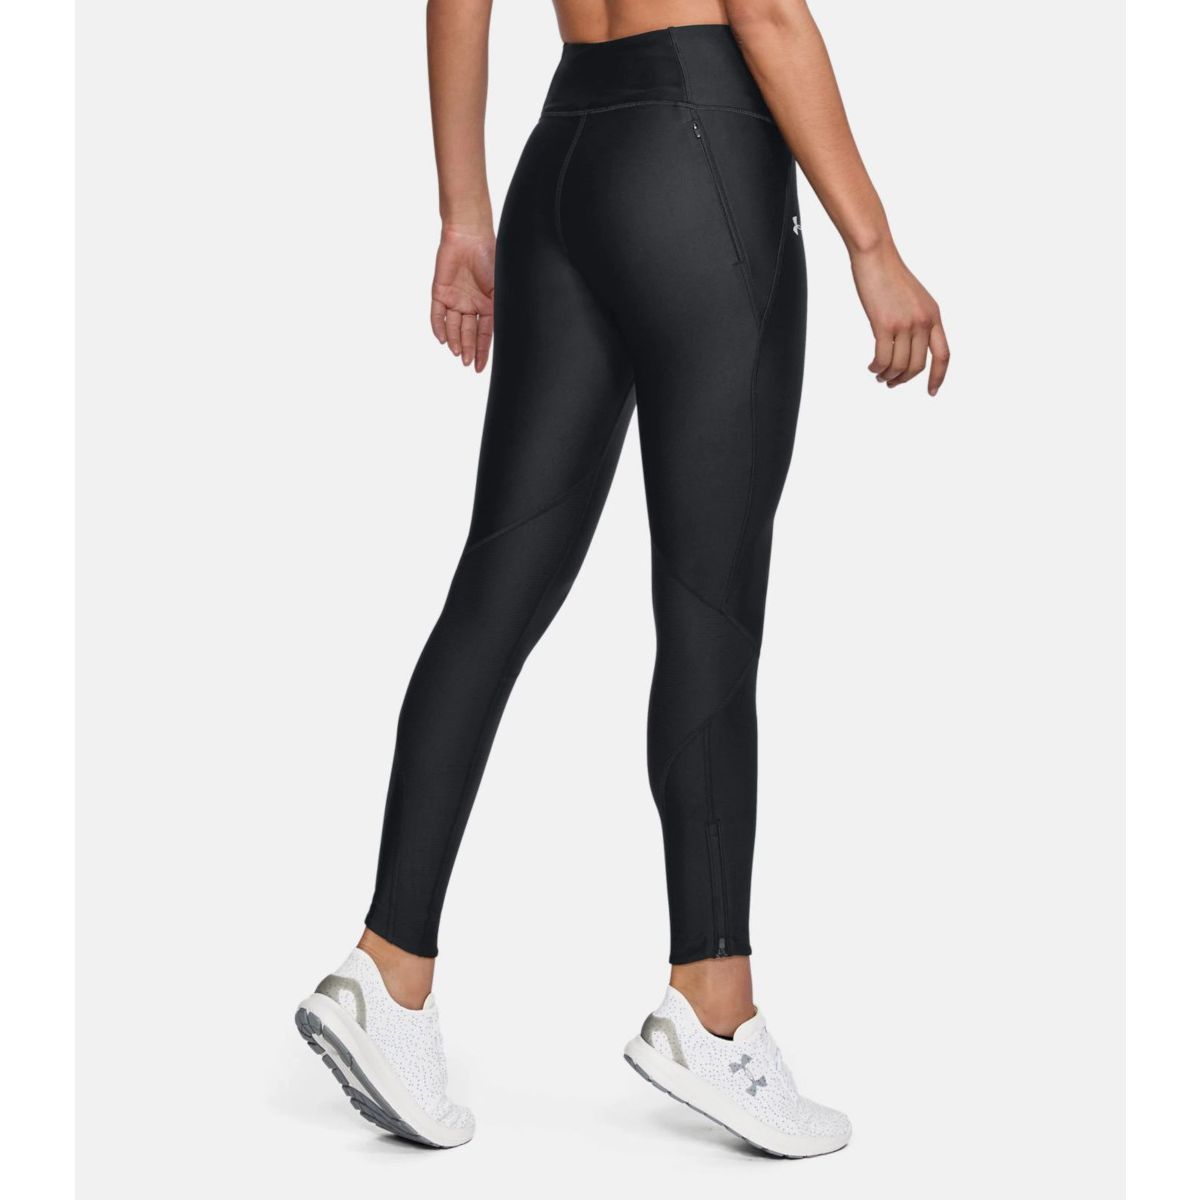 Under Armour Fly Fast Women's Tights 1320322-001